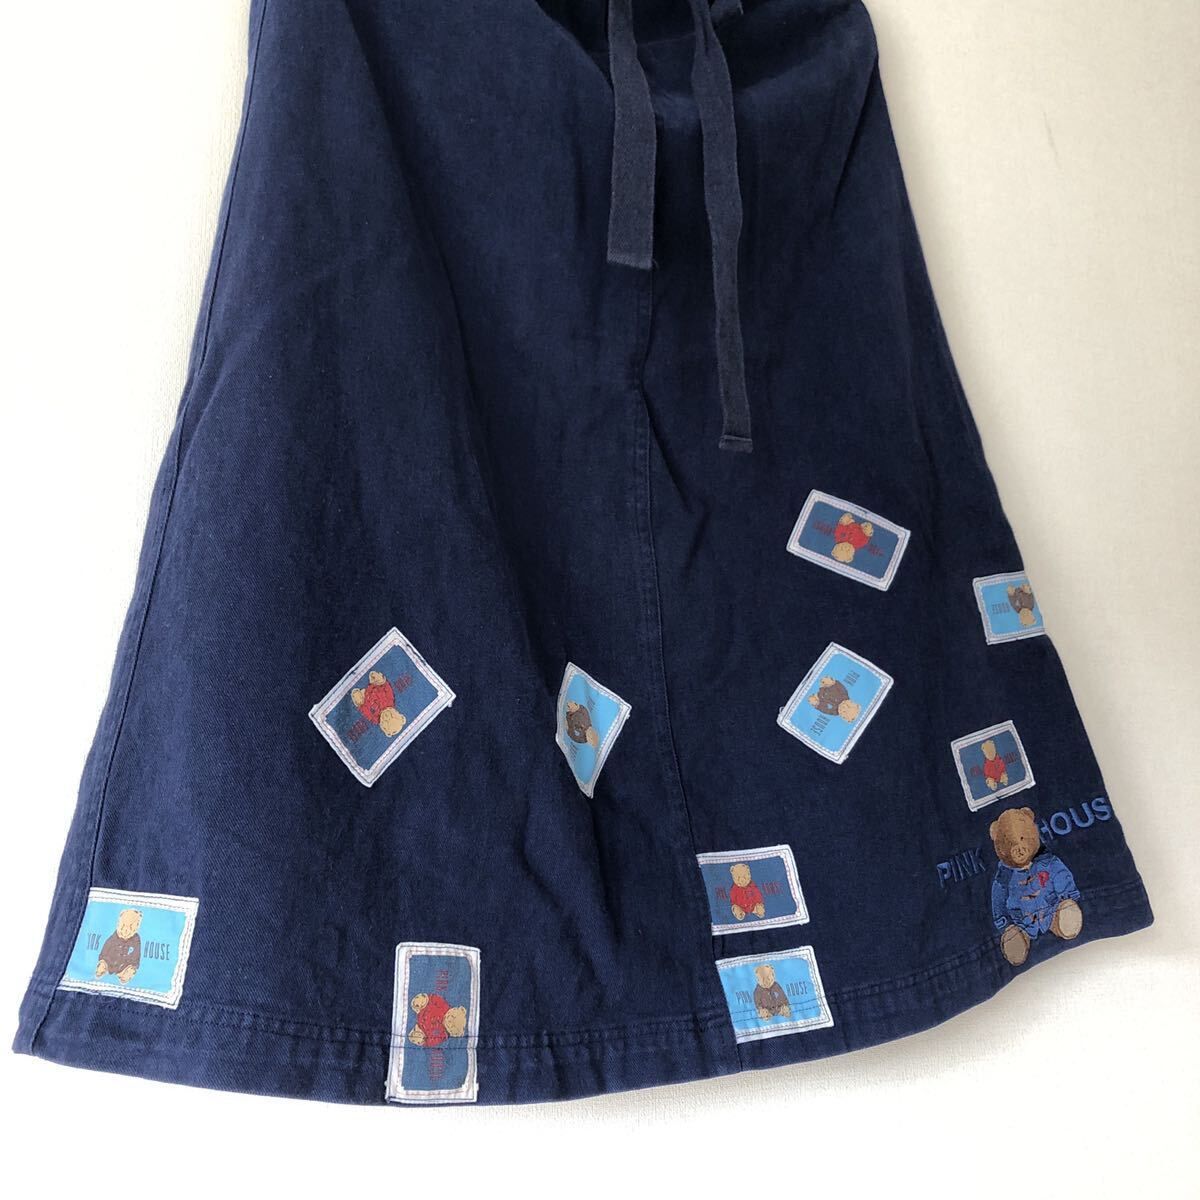  Pink House navy skirt .. badge ribbon PINK HOUSE blue group 